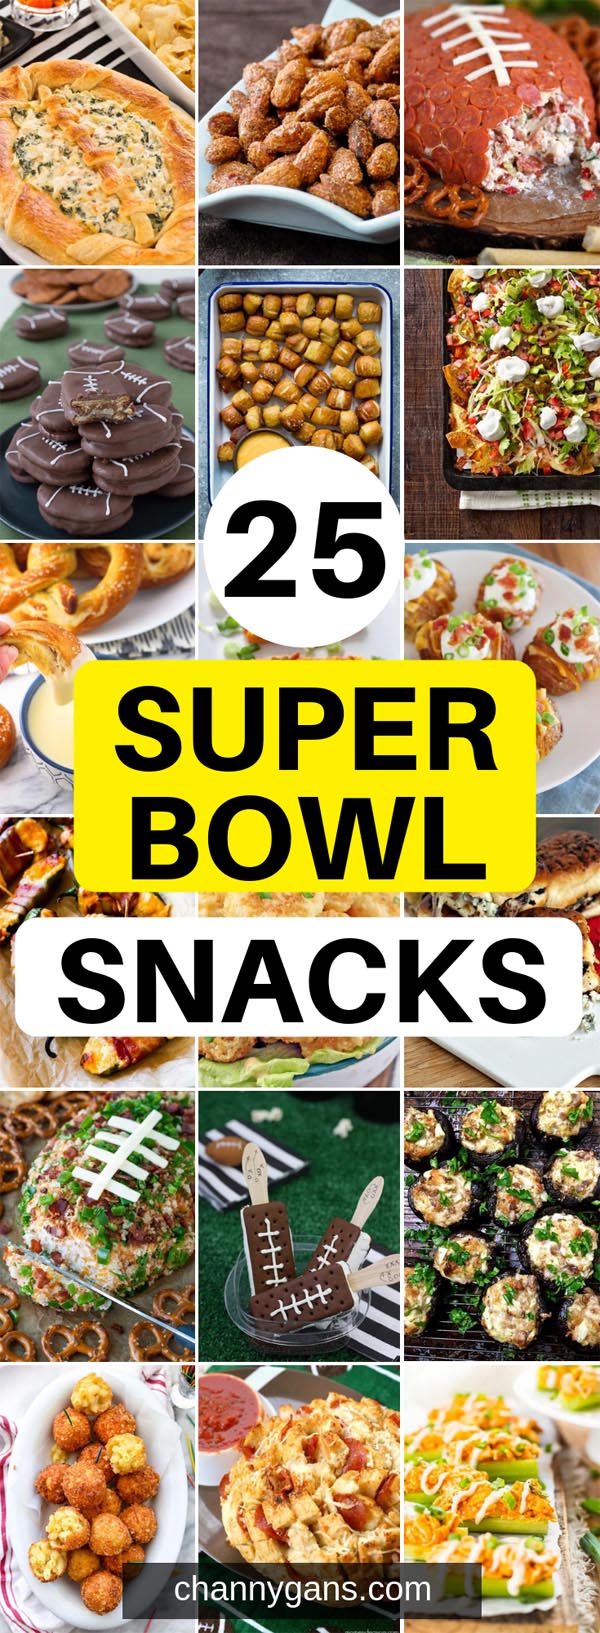 Enjoy game day with these 25 super bowl snacks. There's no need to slave away in the kitchen - make some of these easy super bowl snacks for your next party